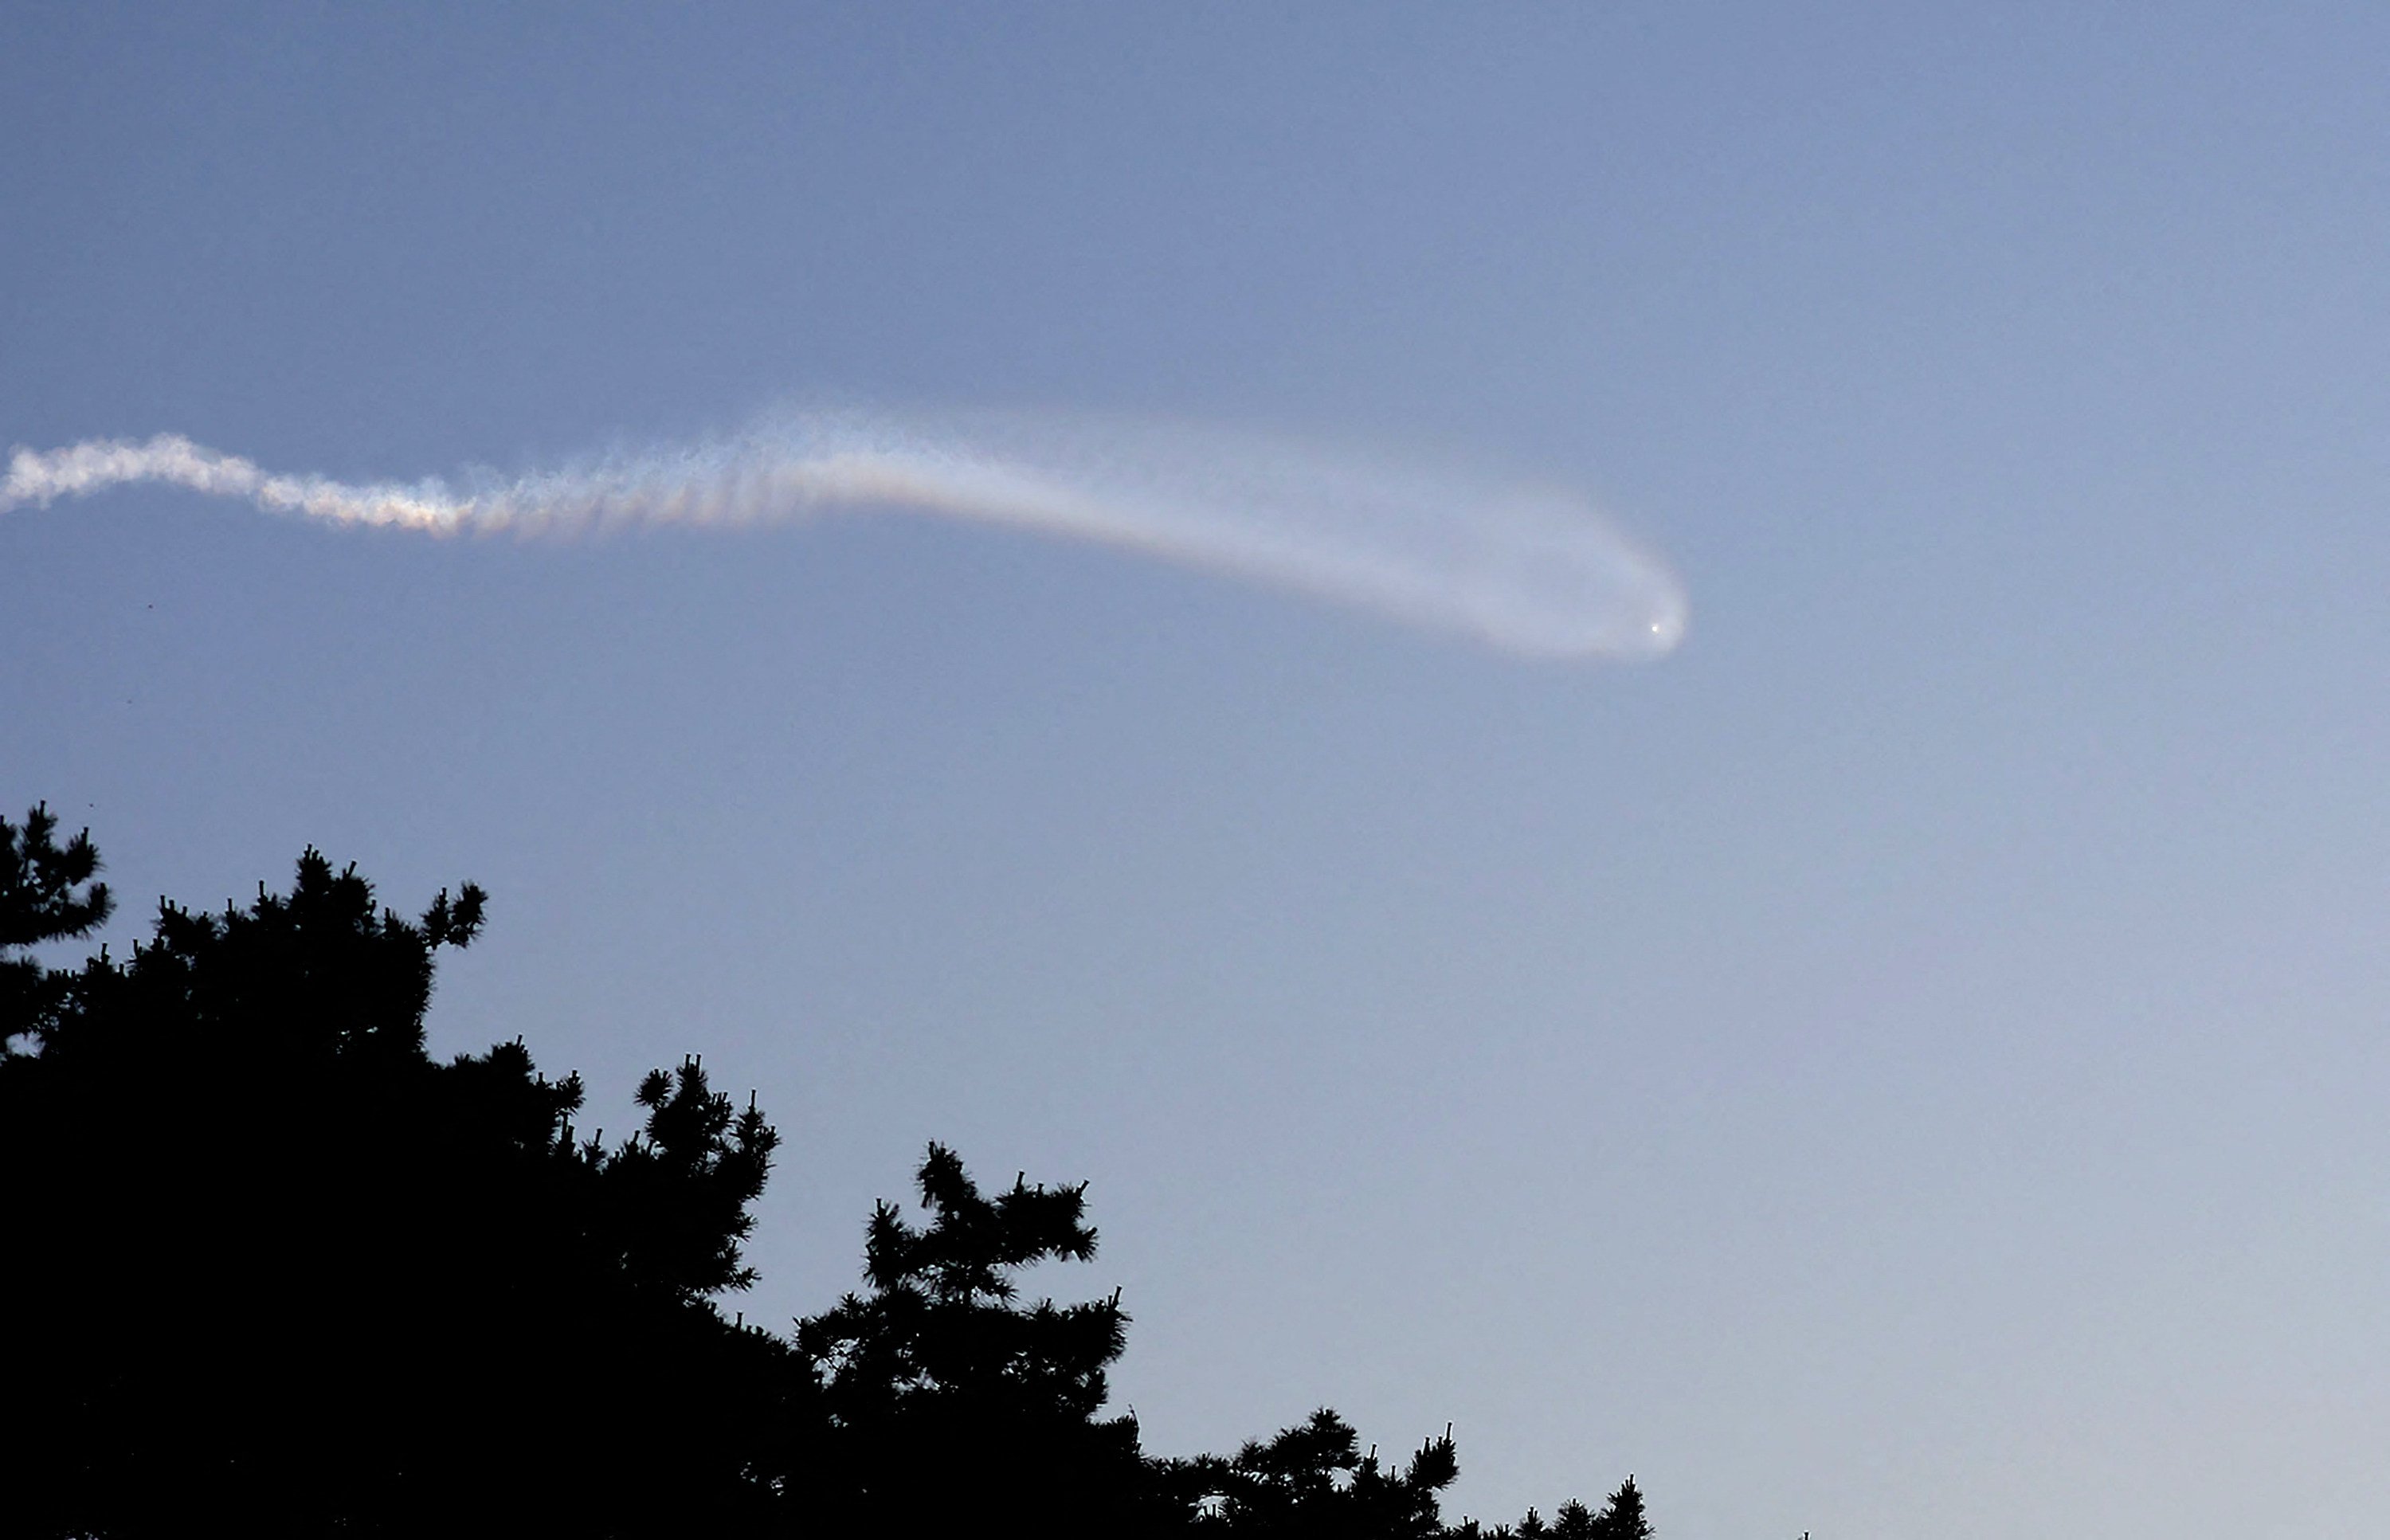 A vapour trail believed to be created by a North Korean missile is seen from Yeonpyeong island, South Korea, on June 26. Photo: Yonhap/AFP